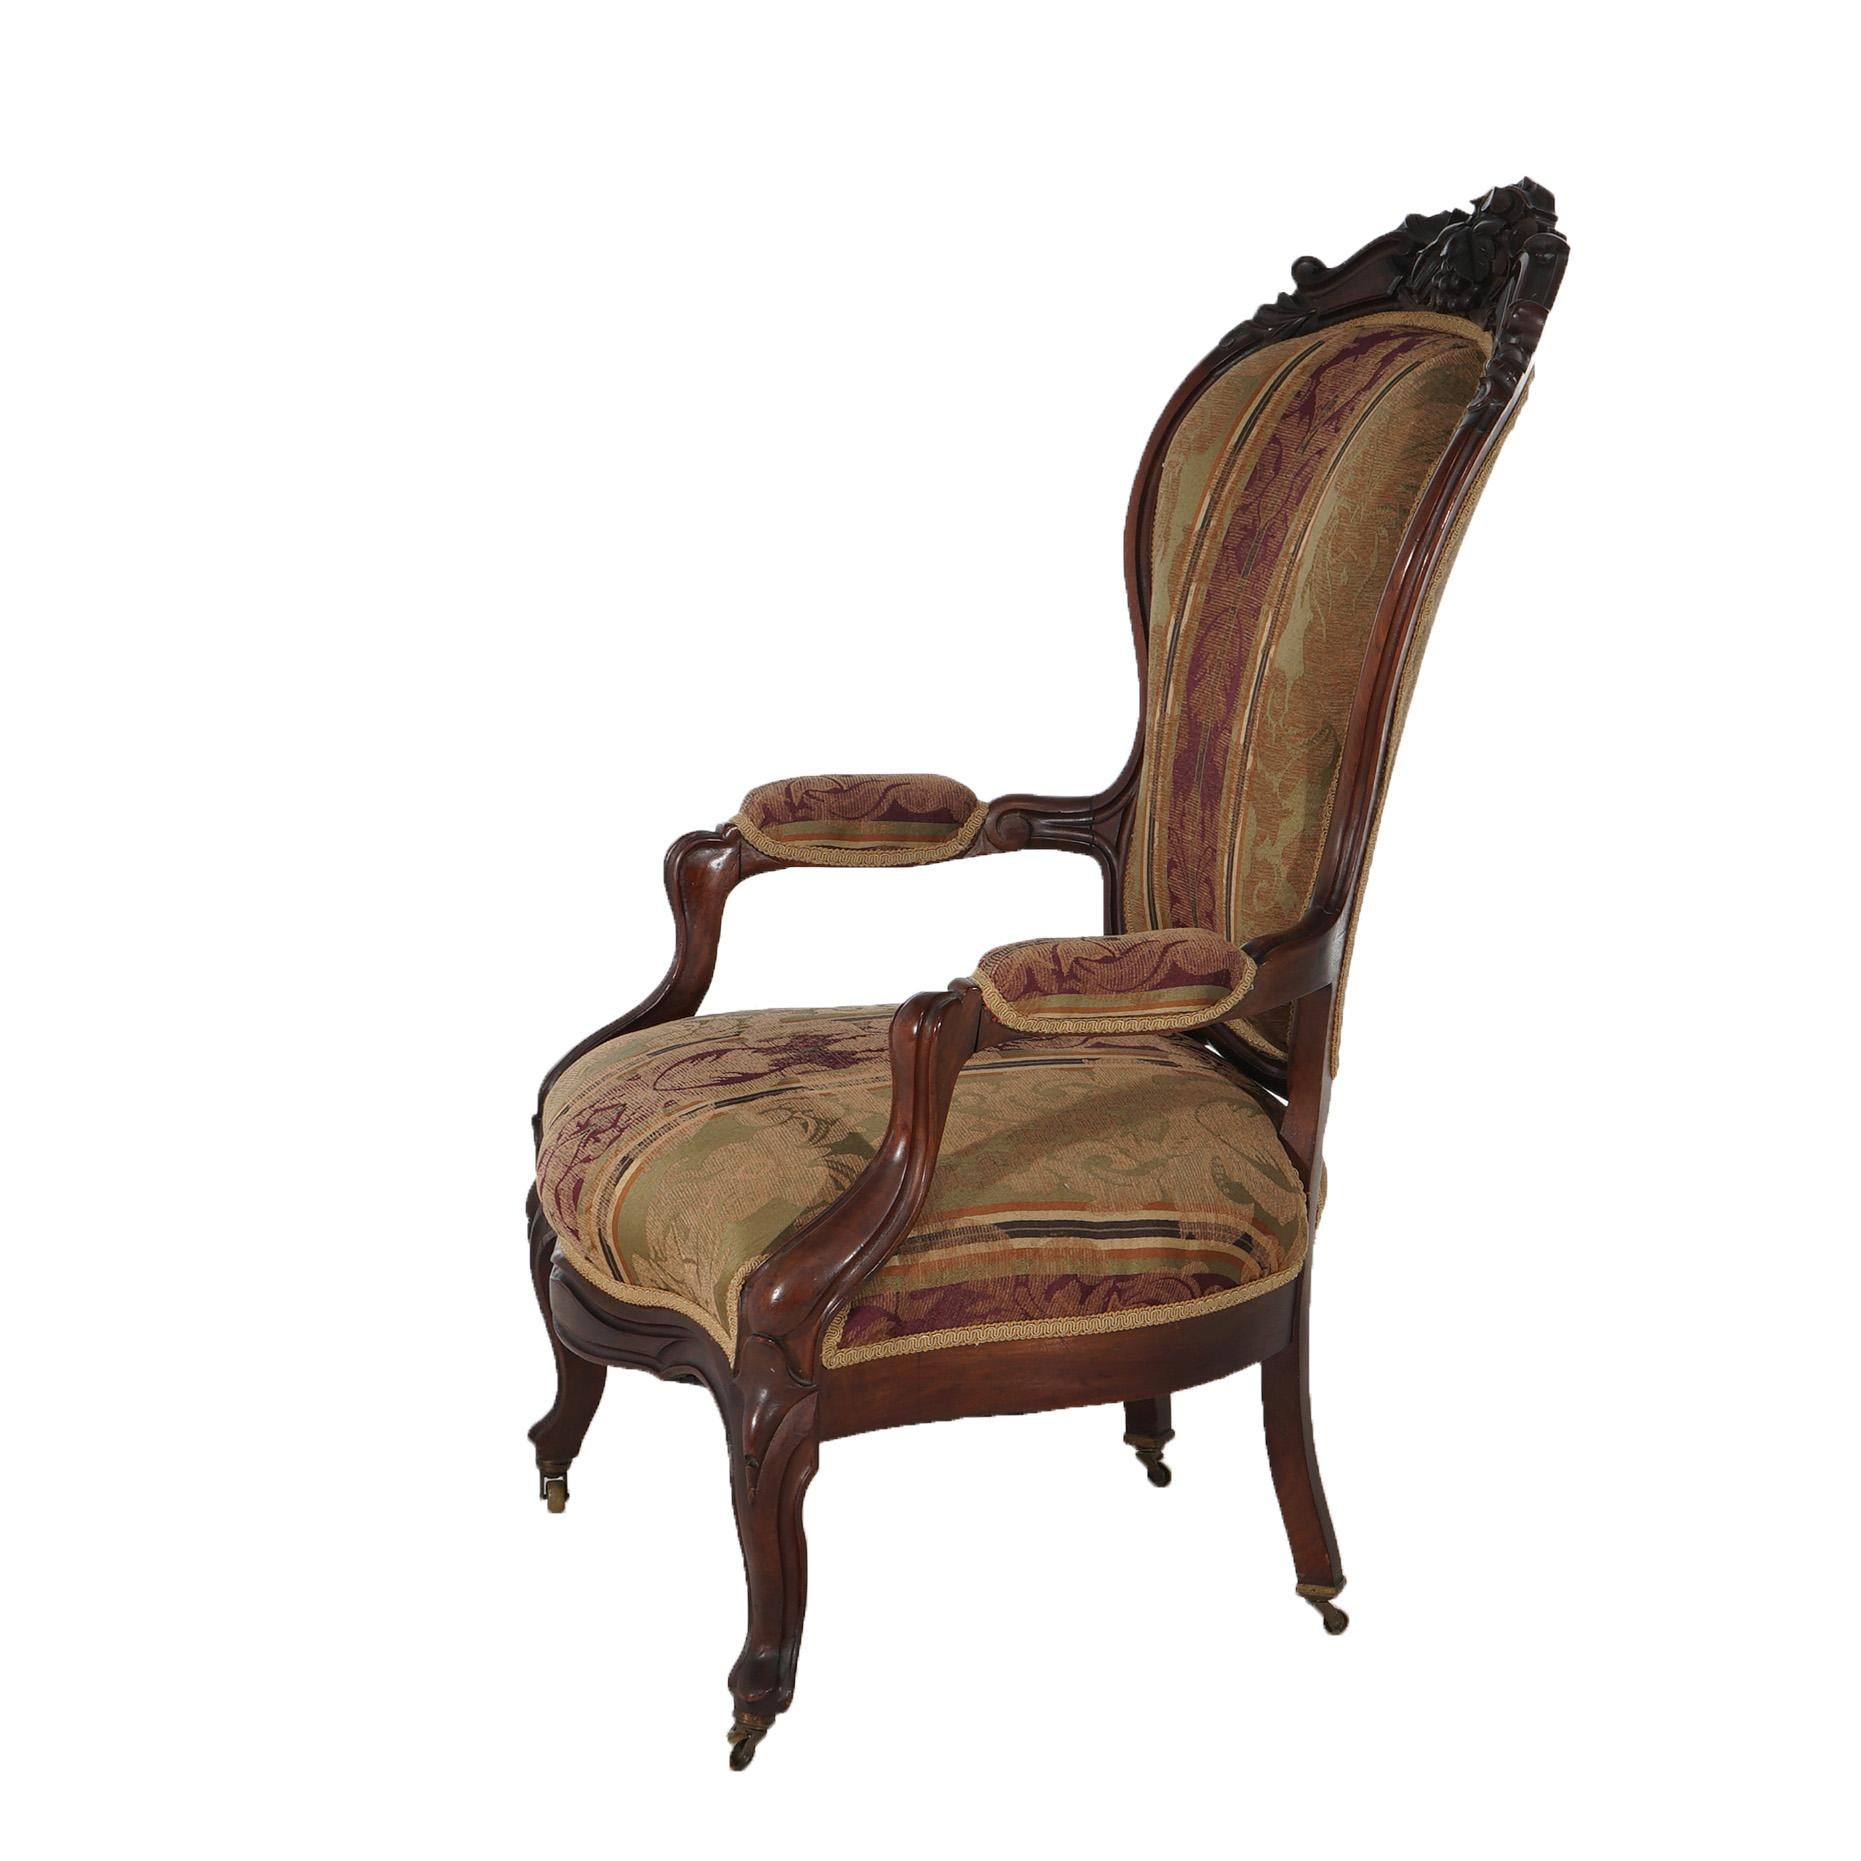 Upholstery Antique Victorian Carved Walnut Upholstered Gentleman’s Chair C1890 For Sale